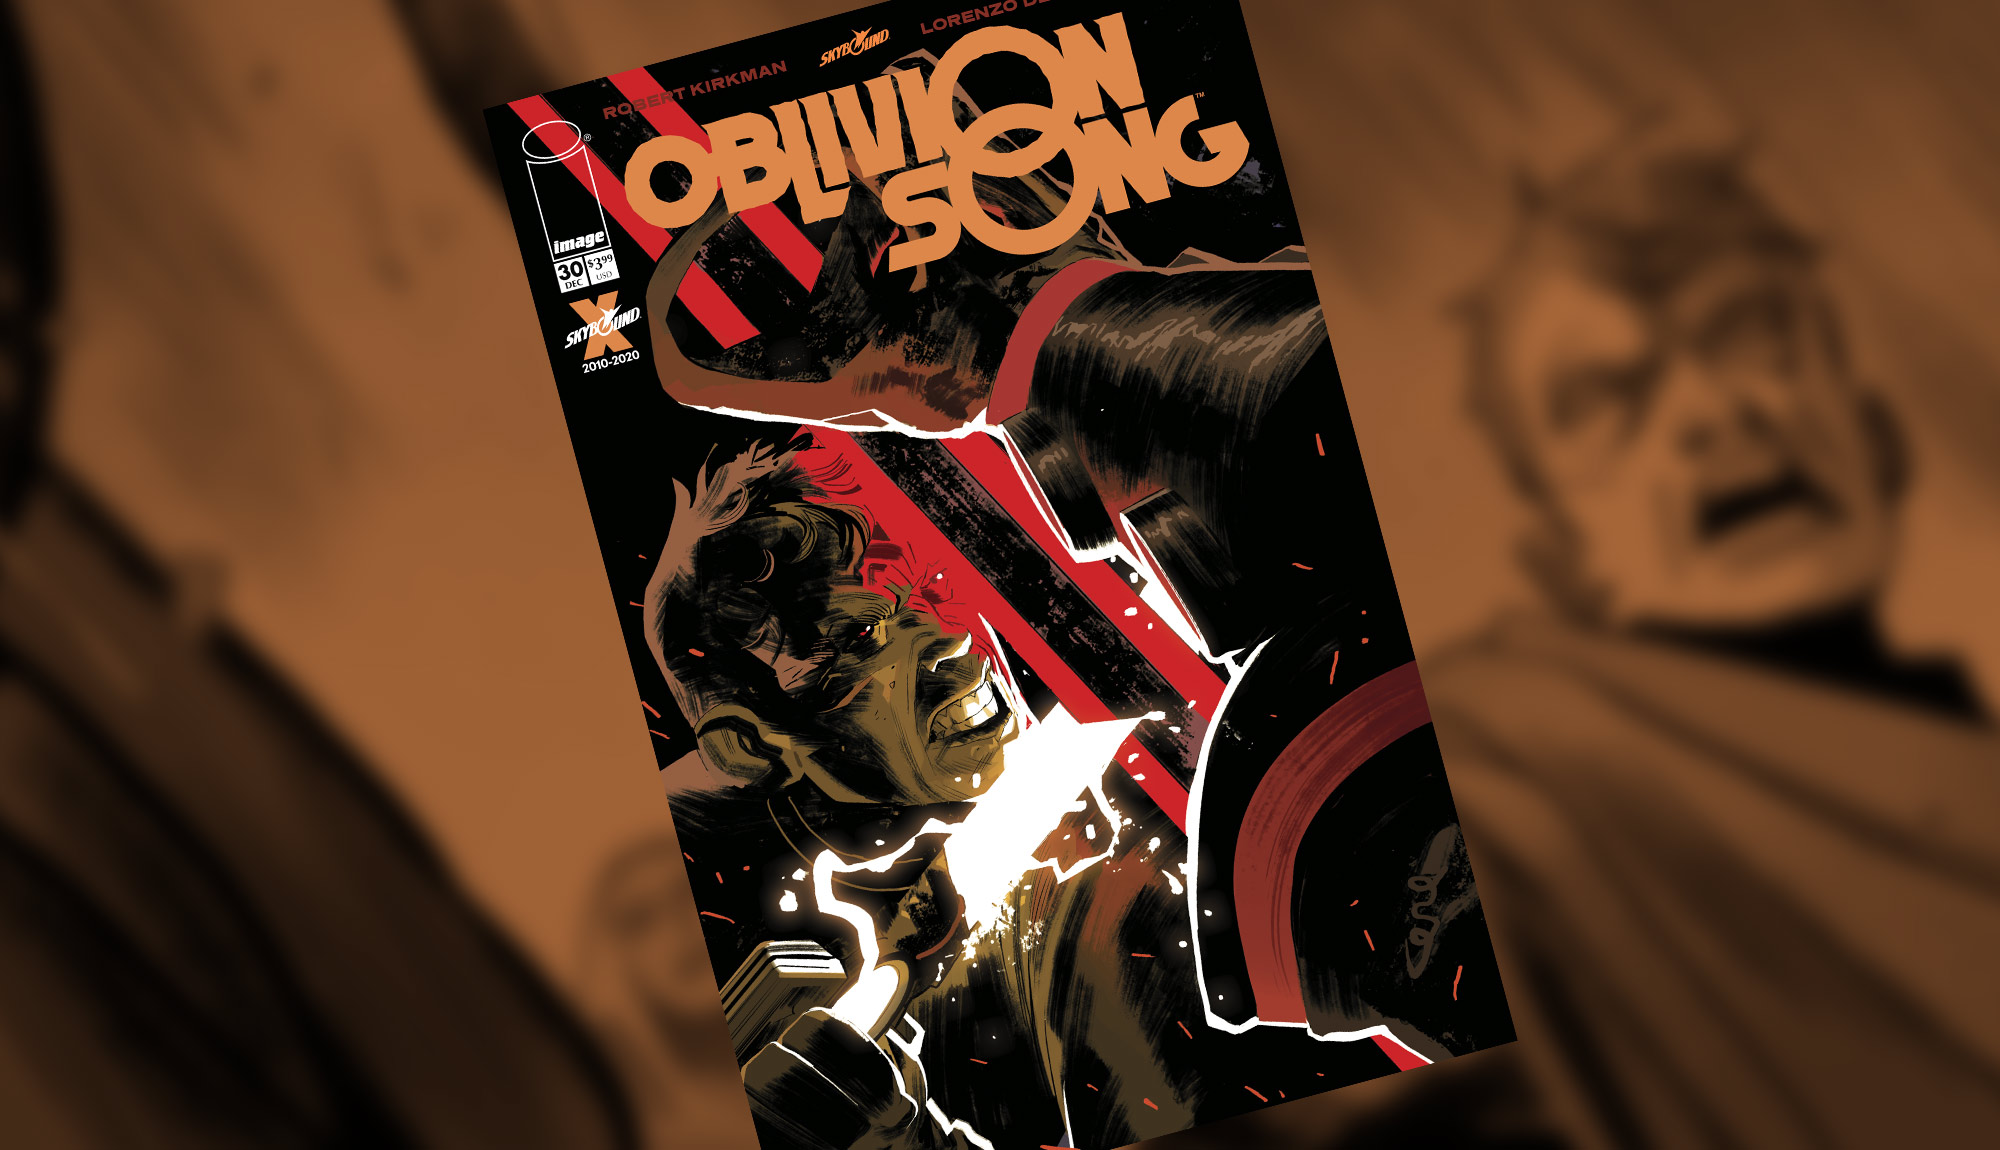 This Week’s Comic: OBLIVION SONG